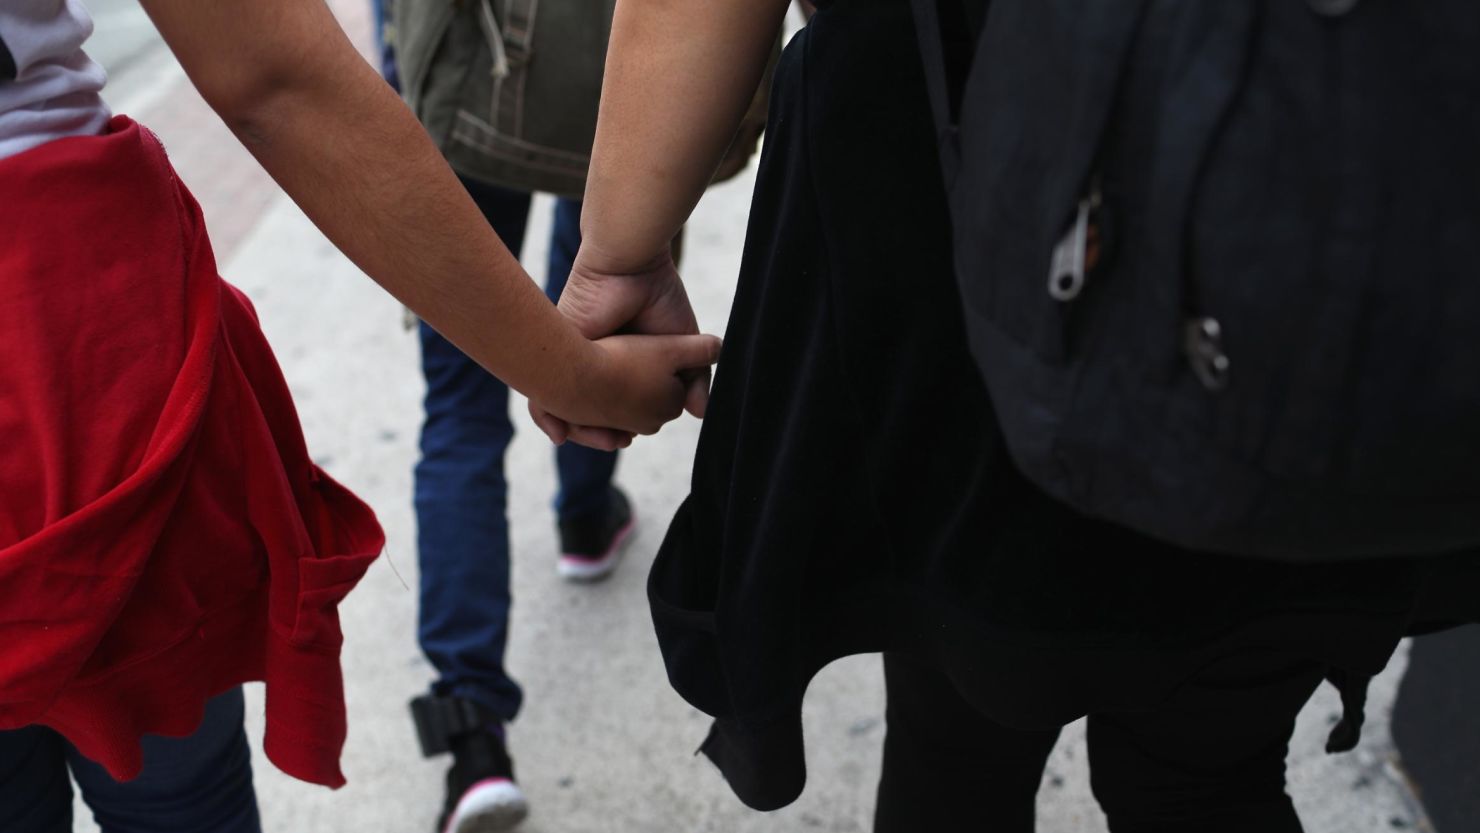 Central American immigrant families depart ICE custody, pending future immigration court hearings on June 11, 2018 in McAllen, Texas. Thousands of undocumented immigrants continue to cross into the U.S., despite the Trump administration's recent "zero tolerance" approach to immigration policy.  (Photo by John Moore/Getty Images)